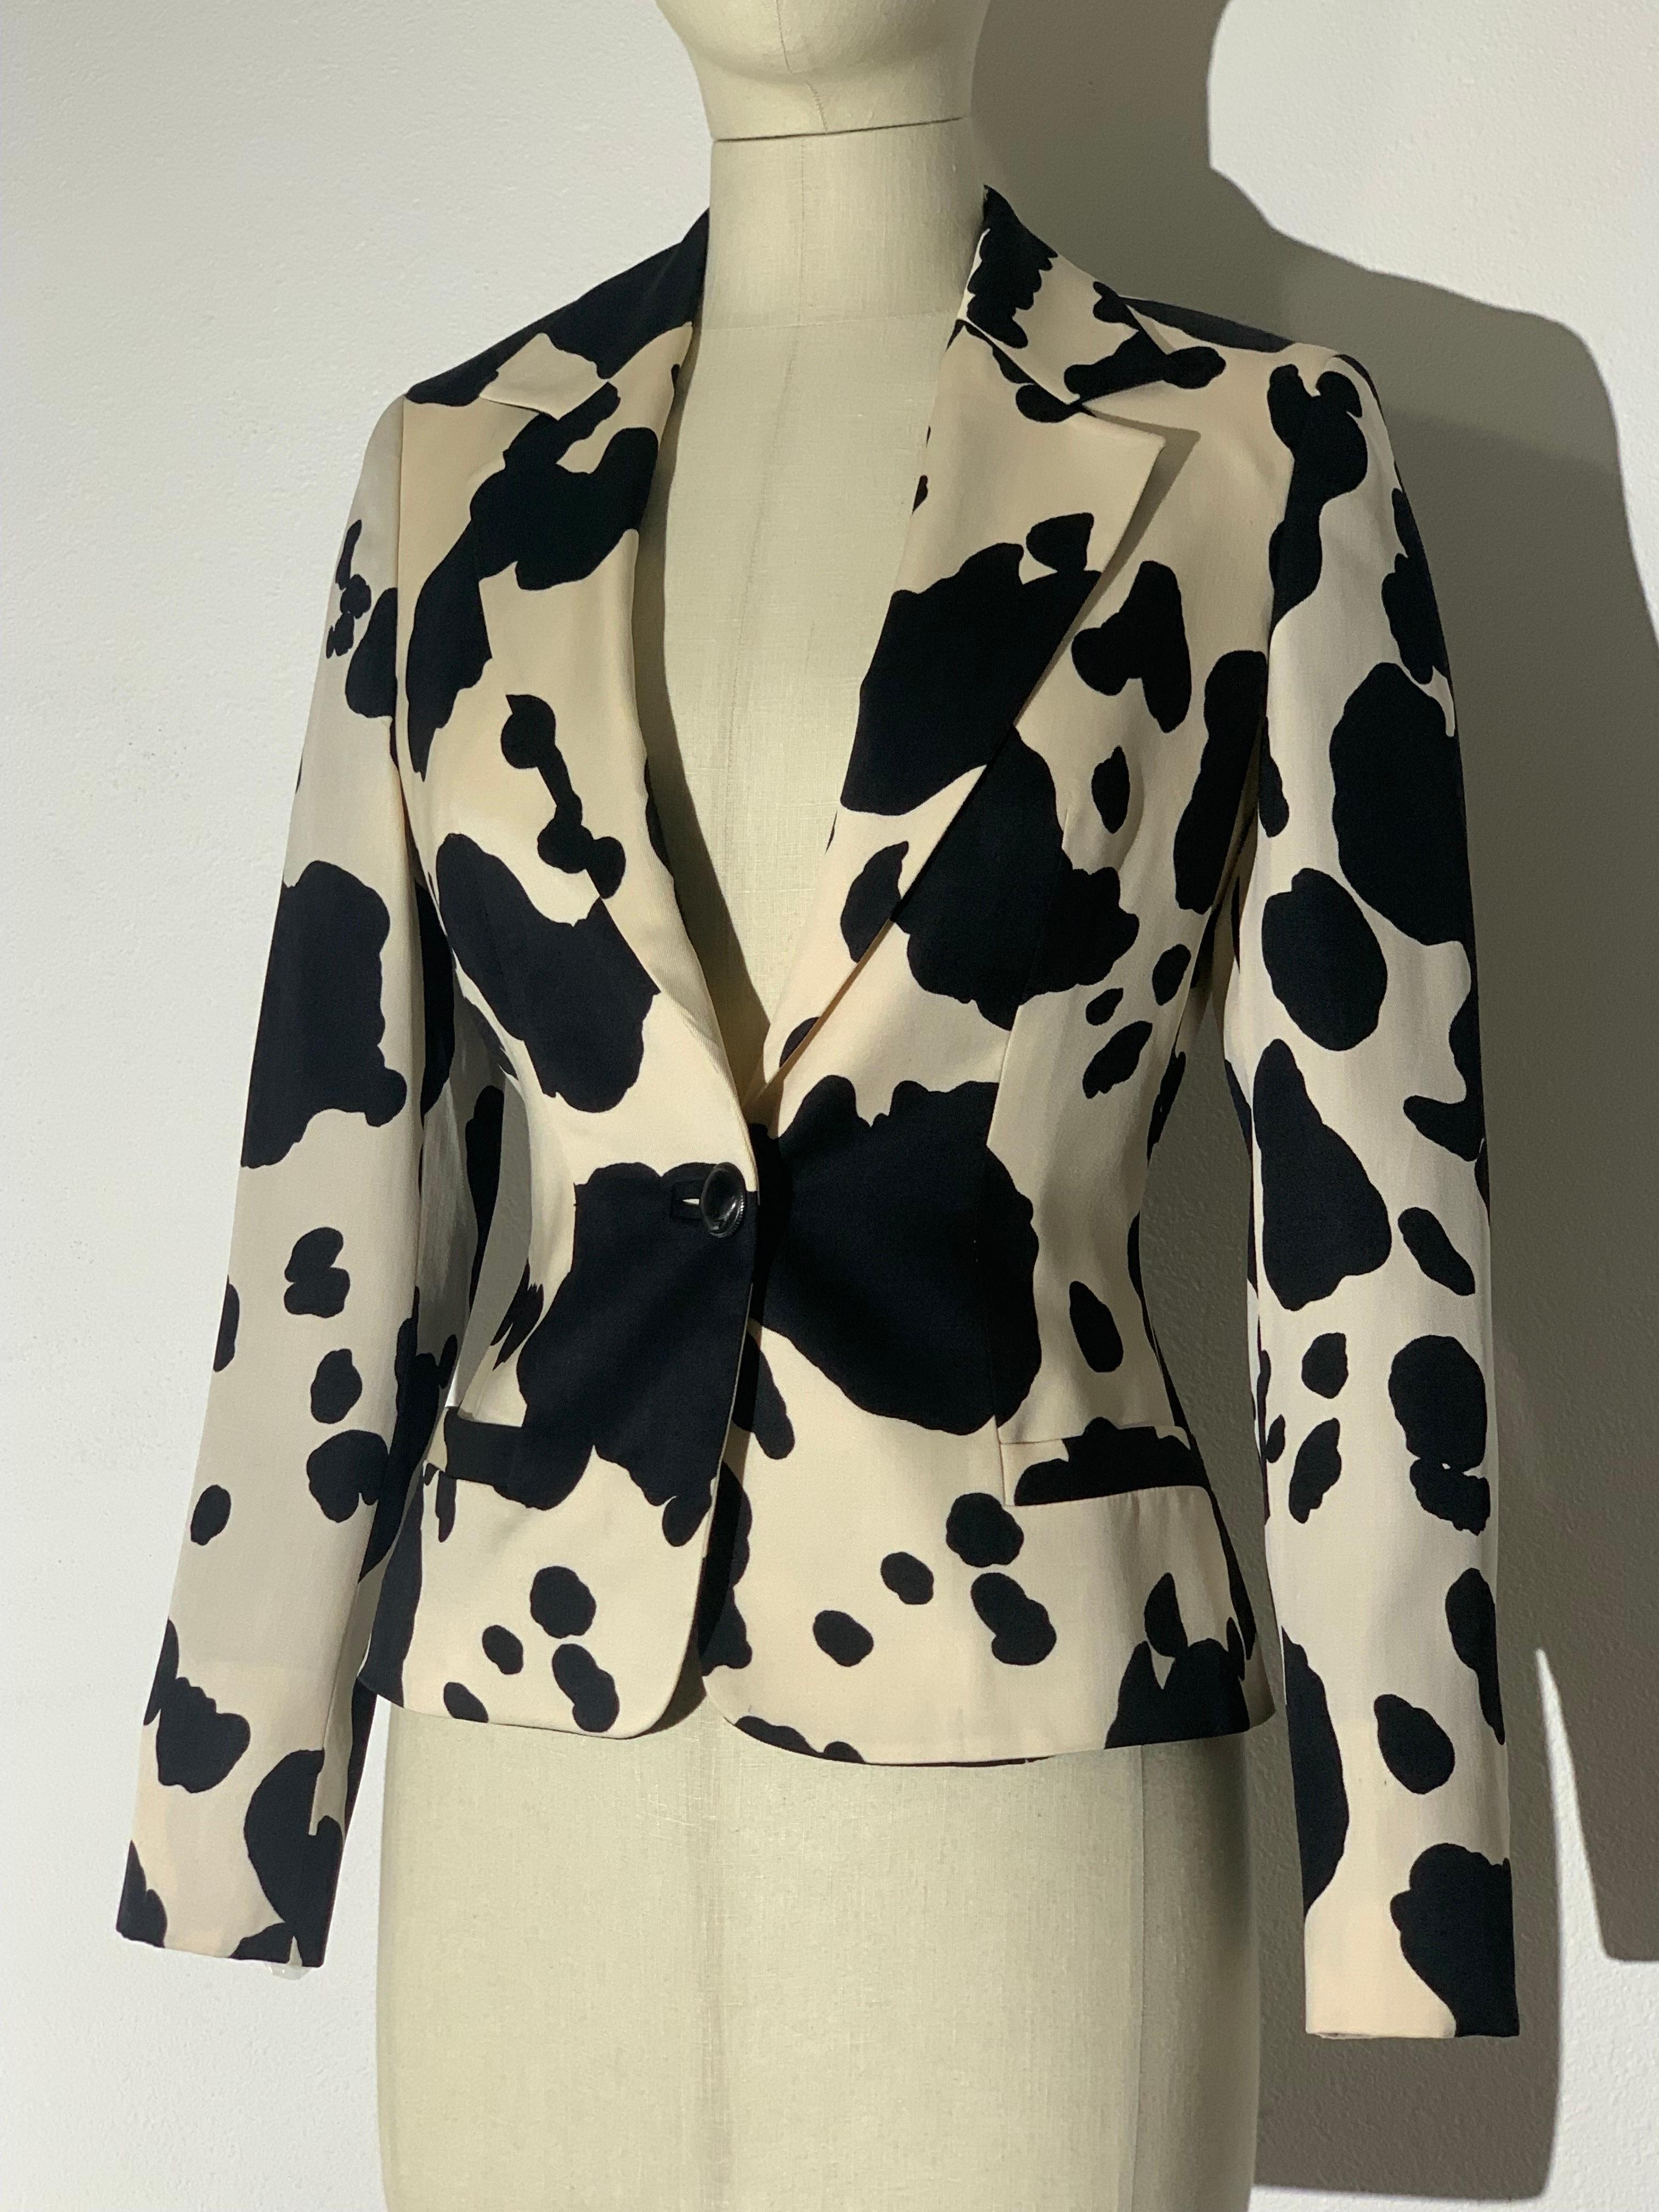 1990s Versus by Gianni Versace Western-Inspired  Black/White Cow Print Wool Gabardine Jacket w Single Button Closure. Peaked lapels. Satin lined. Beautifully shaped body-conscious silhouette. EU size 38.